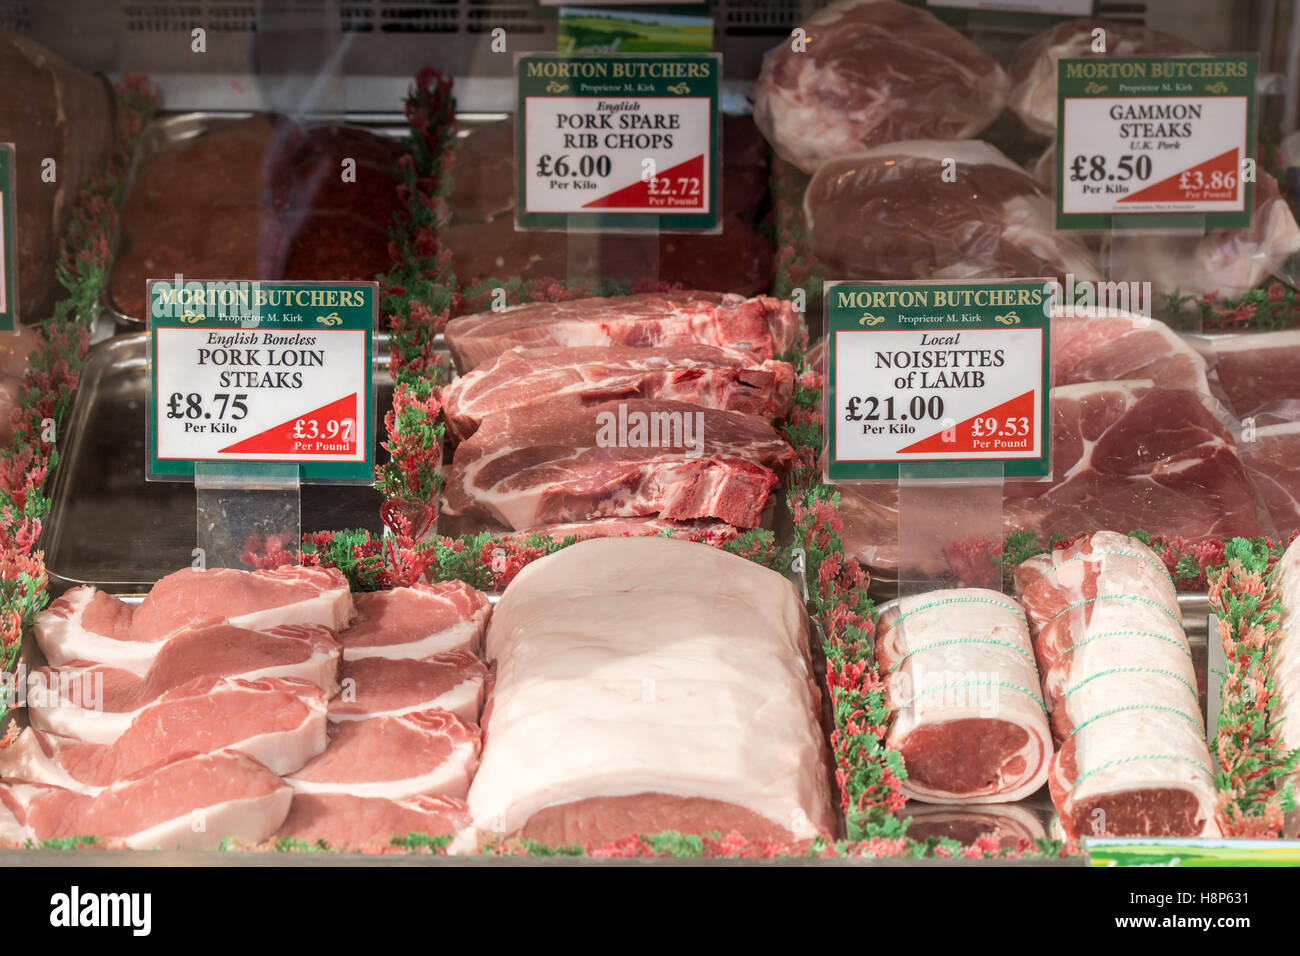 UK, England, Yorkshire, Richmond - A local butcher shop selling different cuts of meat in the city of Richmond located in Northe Stock Photo